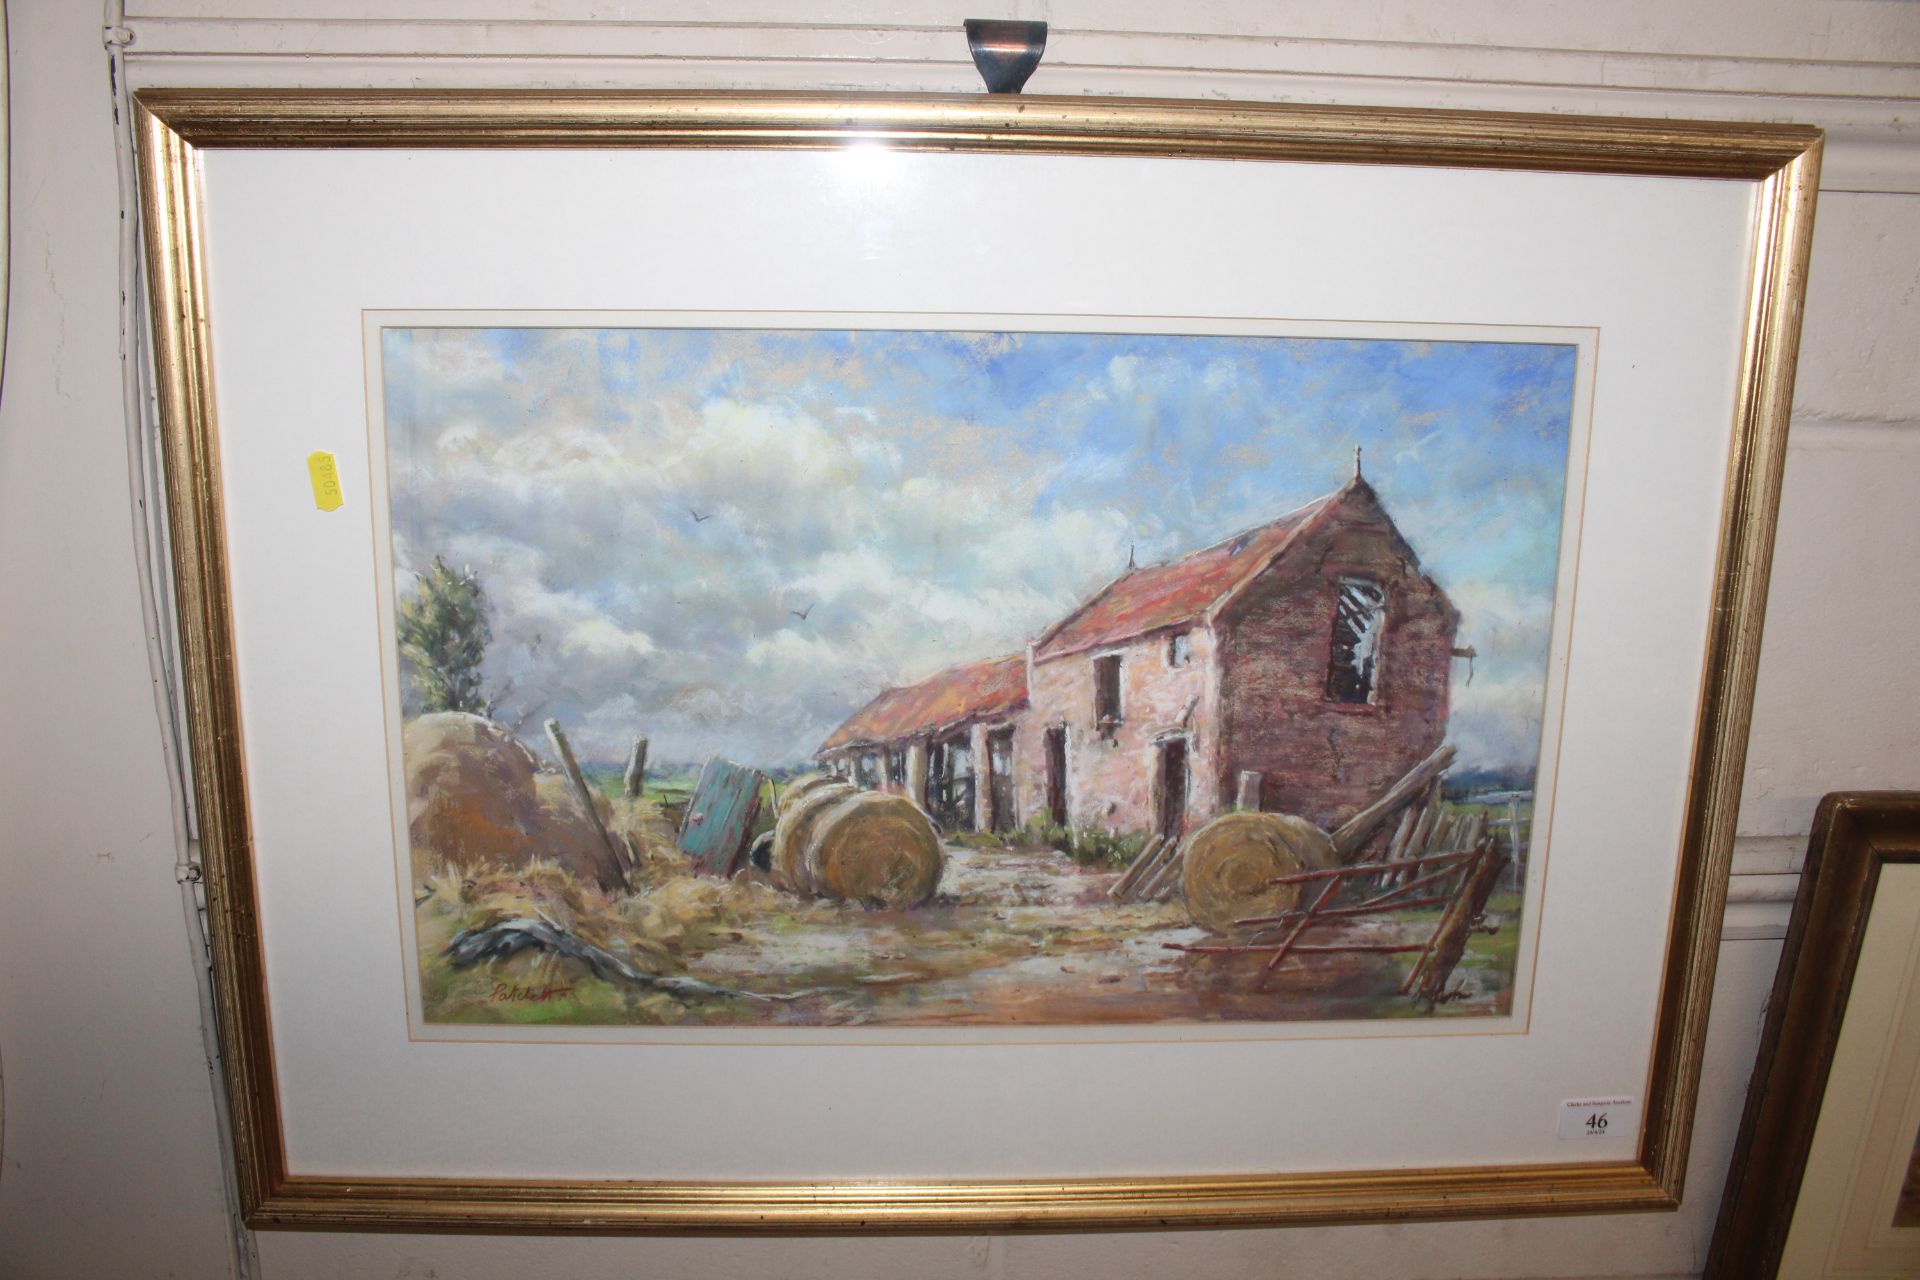 John Patchett, "Old Farmyard" signed and dated 199